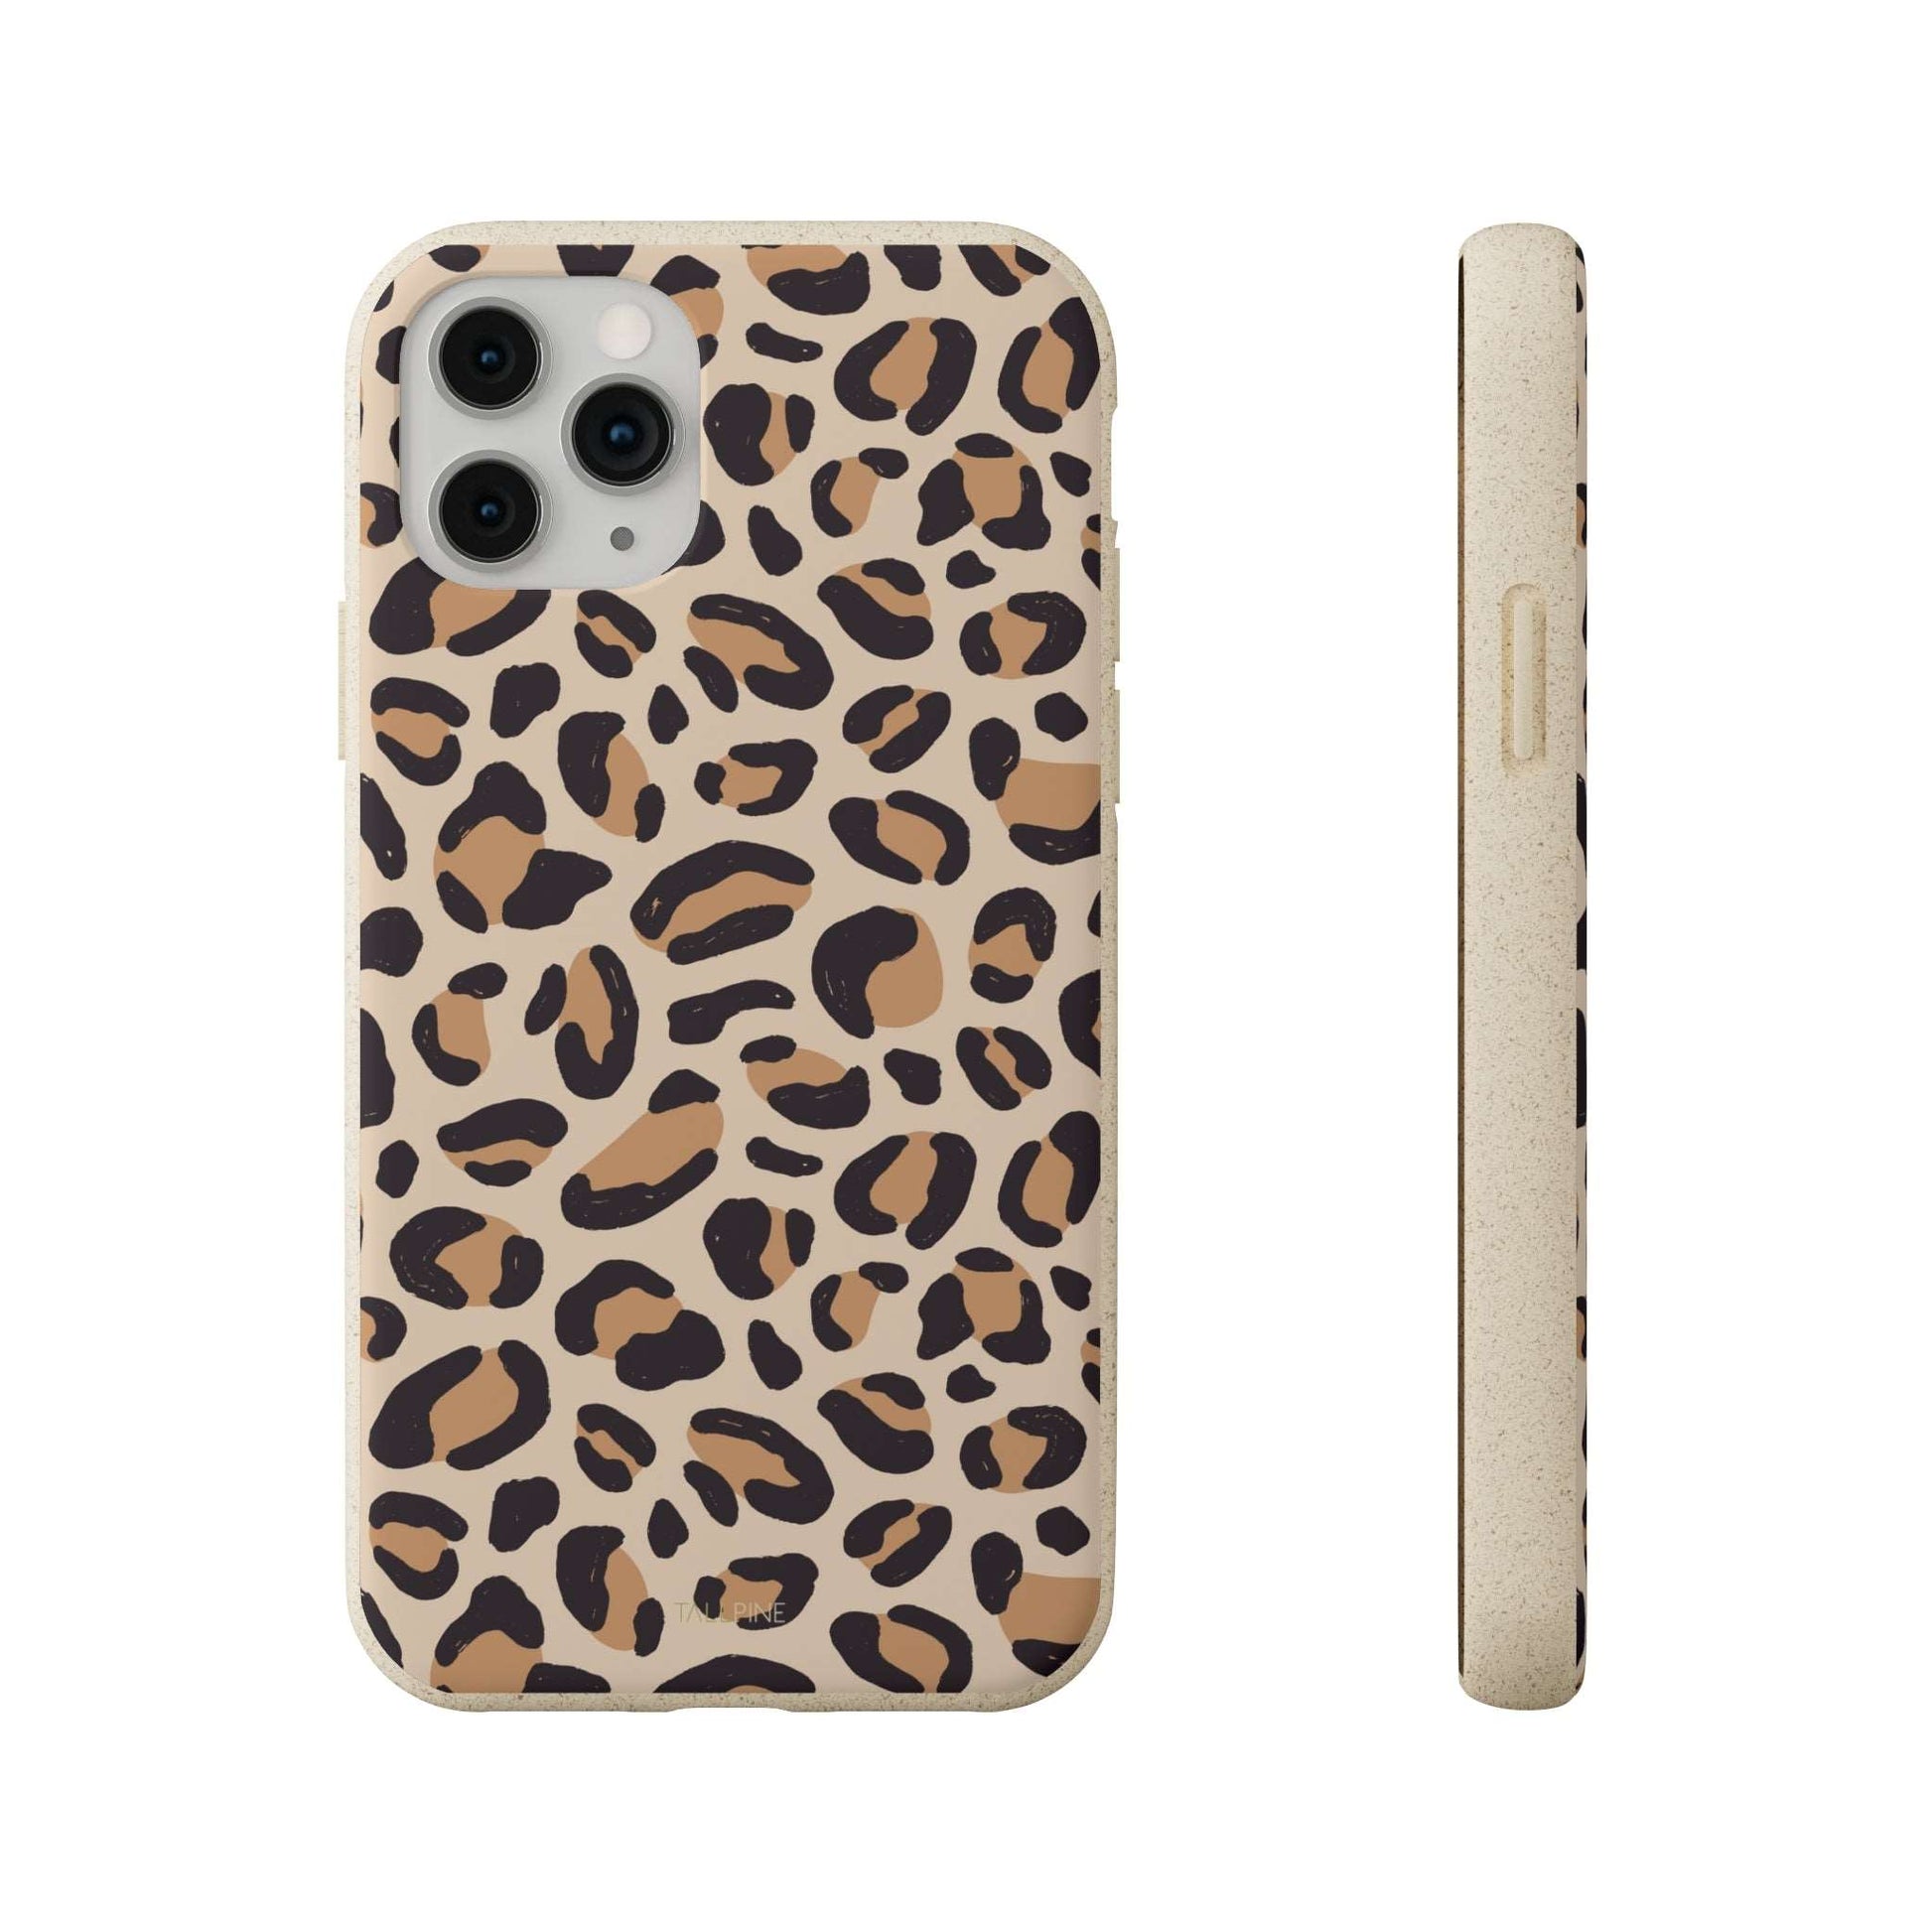 Beige Leopard - Eco Case iPhone 11 Pro - Tallpine | Sustainable and Eco-Friendly Phone Cases - Abstract Leopard print